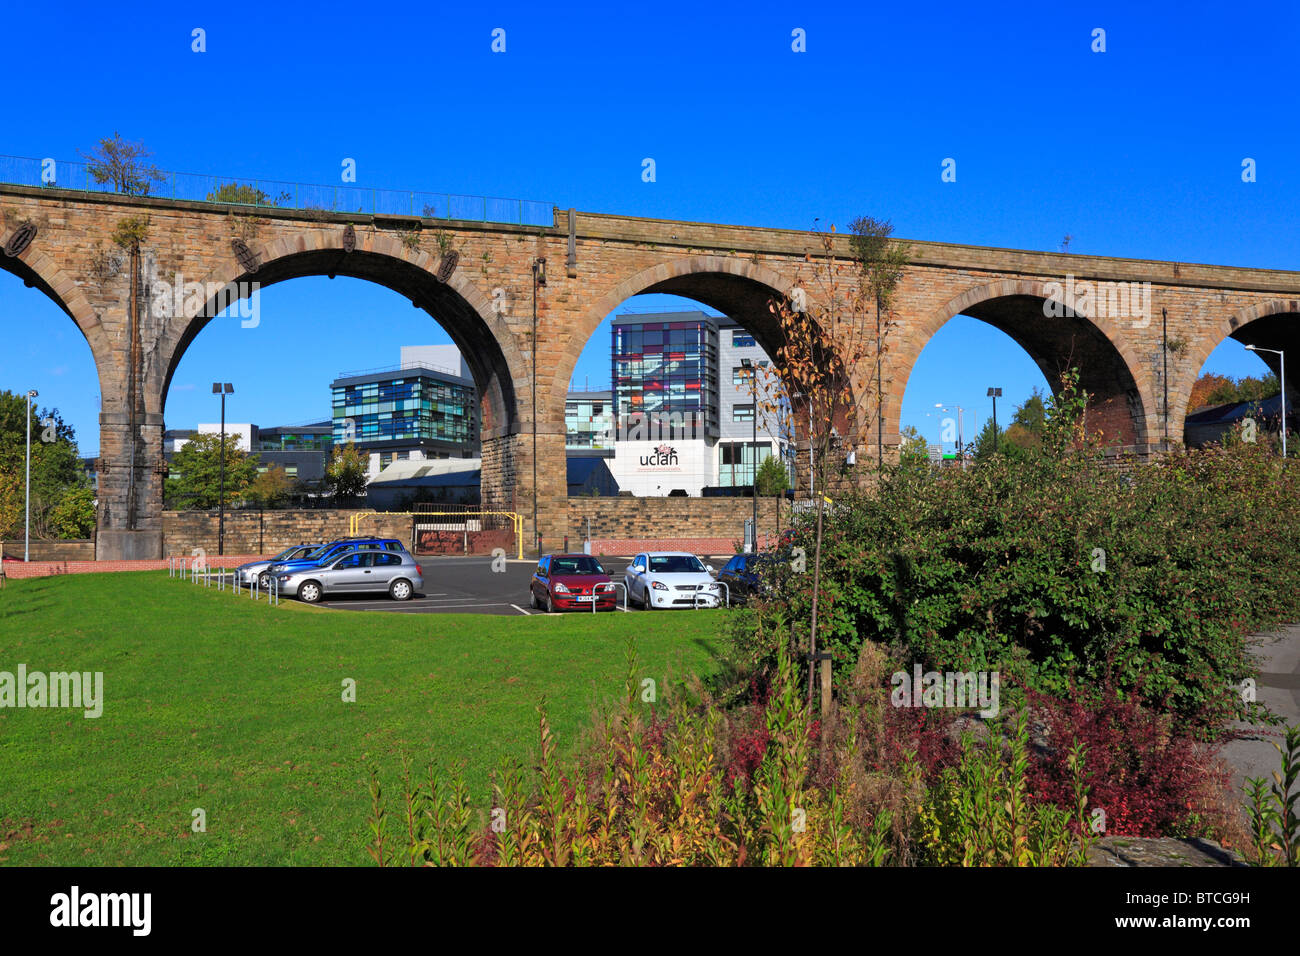 uclan University of Central Lancashire and Burnley College through the railway viaduct arches, Burnley, Lancashire, England, UK. Stock Photo